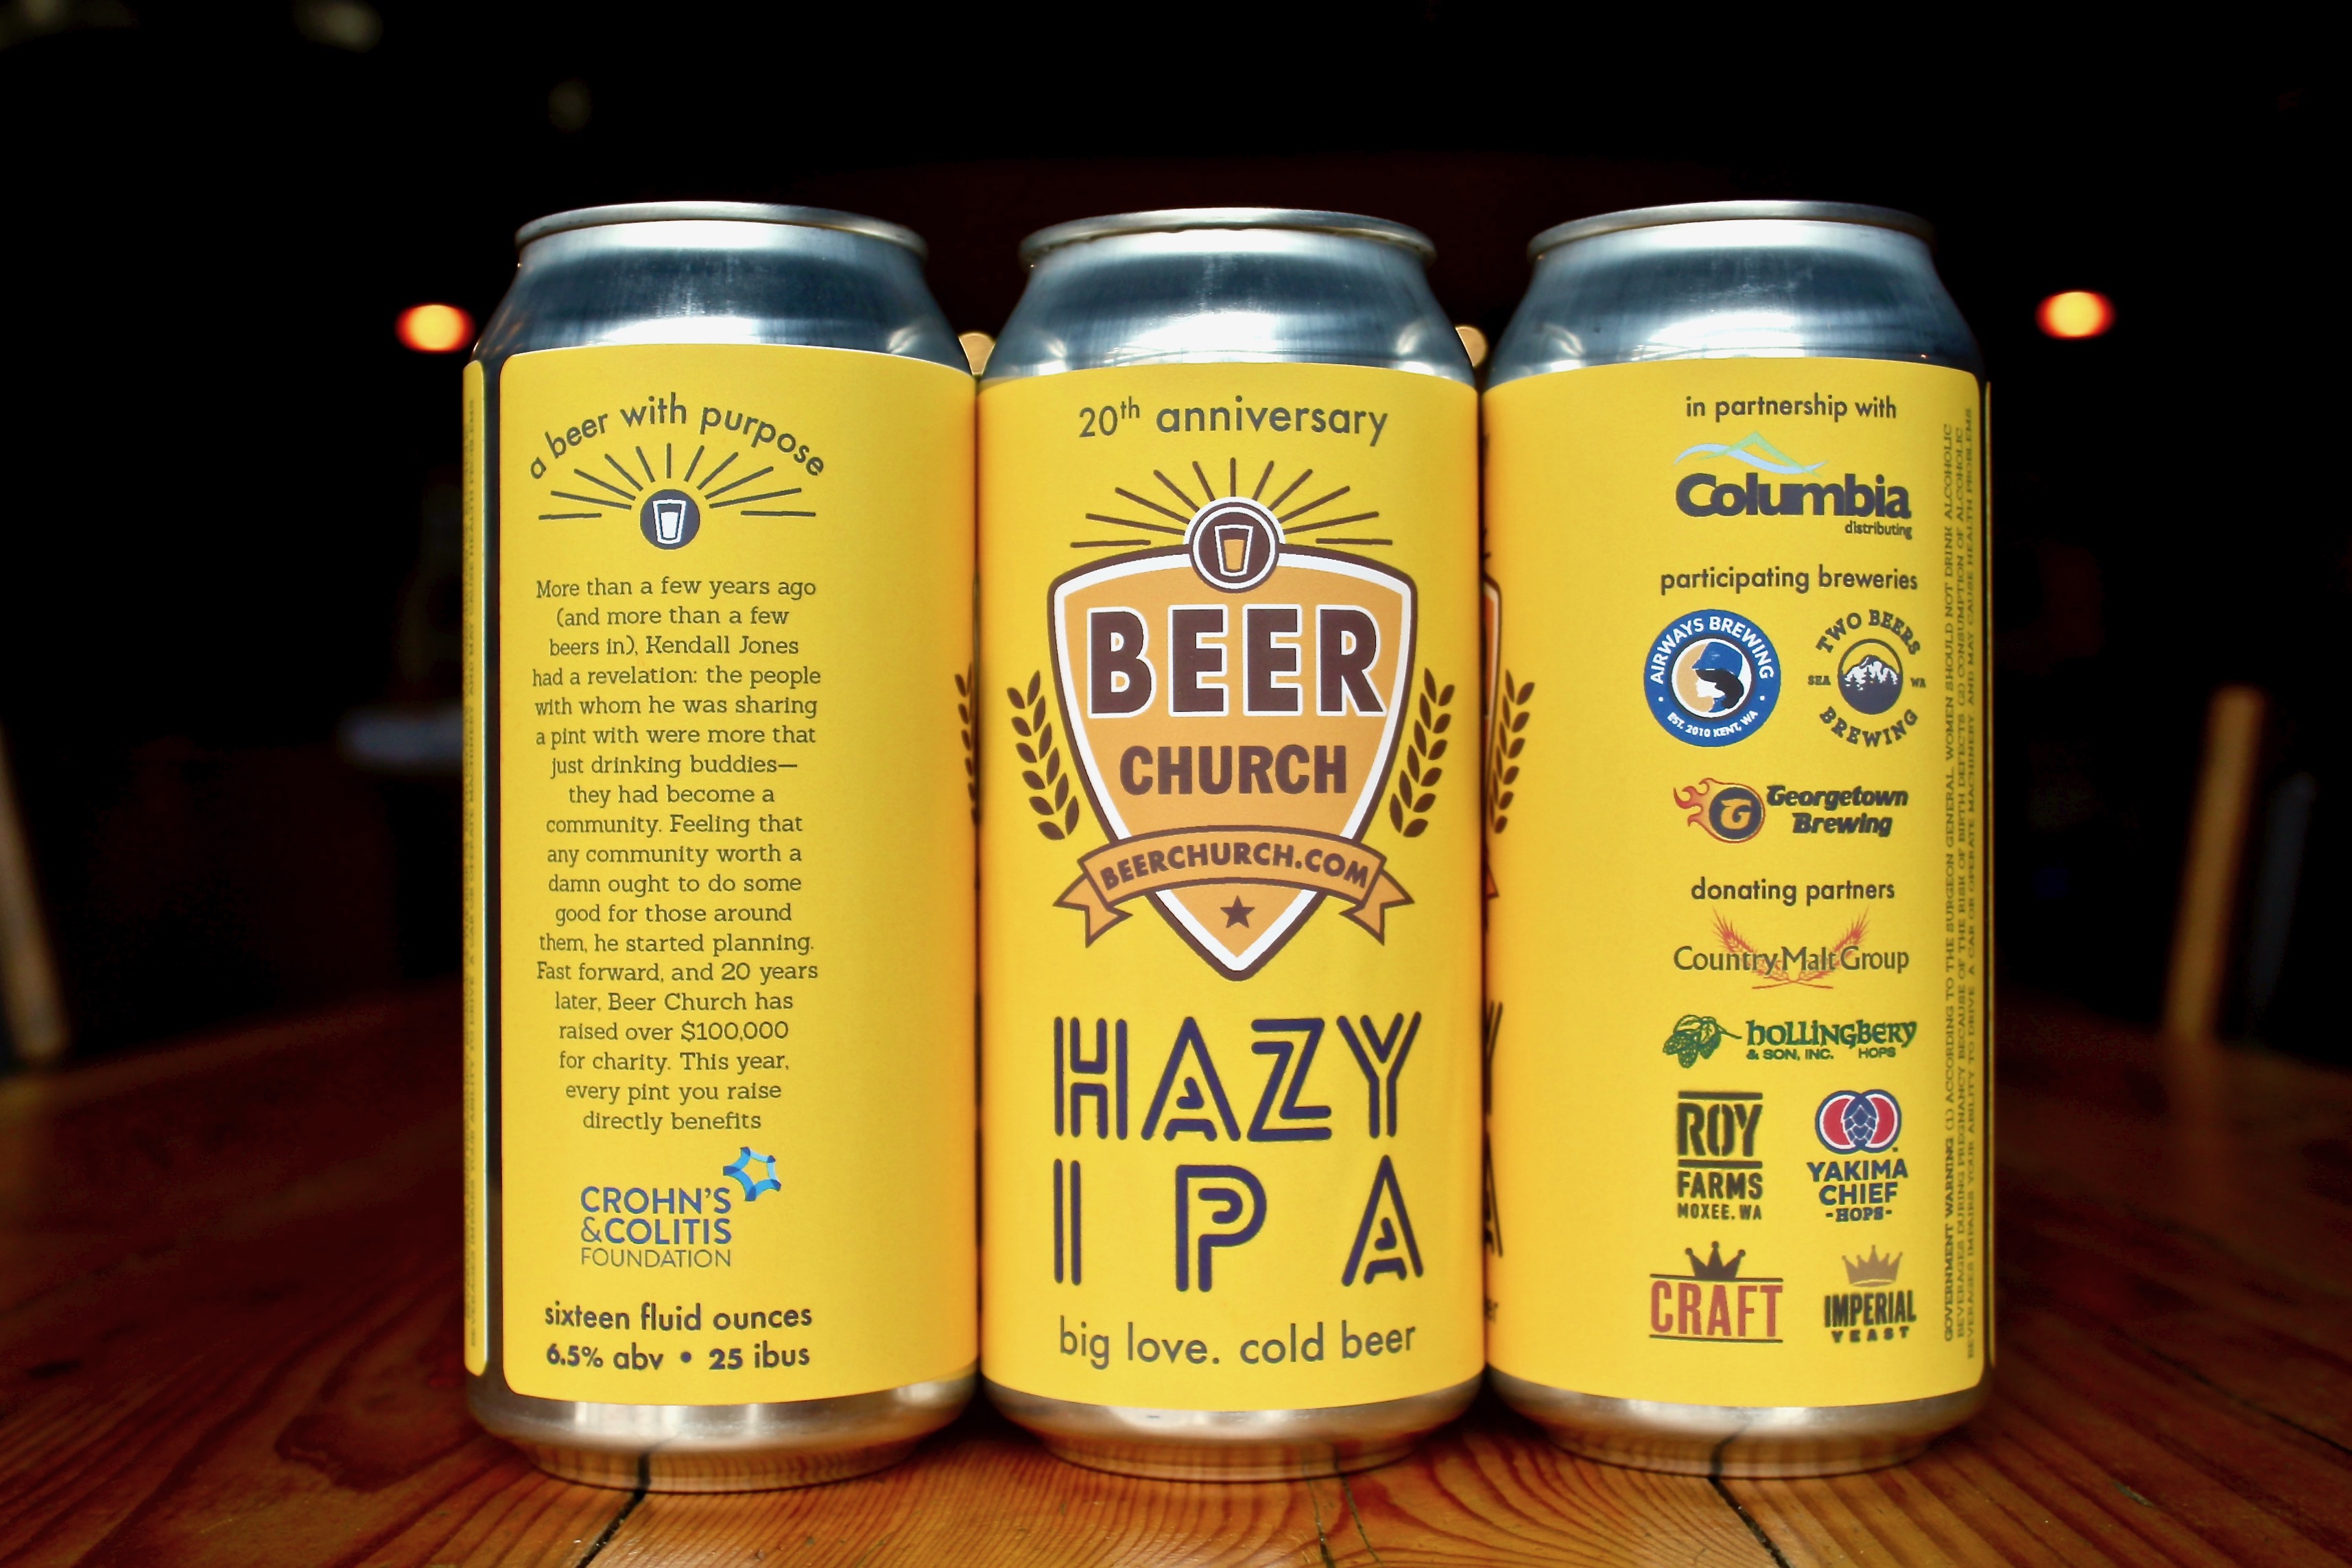 Beer Church Hazy IPA is a collaboration beer from Airways Brewing, Georgetown Brewing, and Two Beers Brewing Co. (image courtesy of Two Beers Brewing)